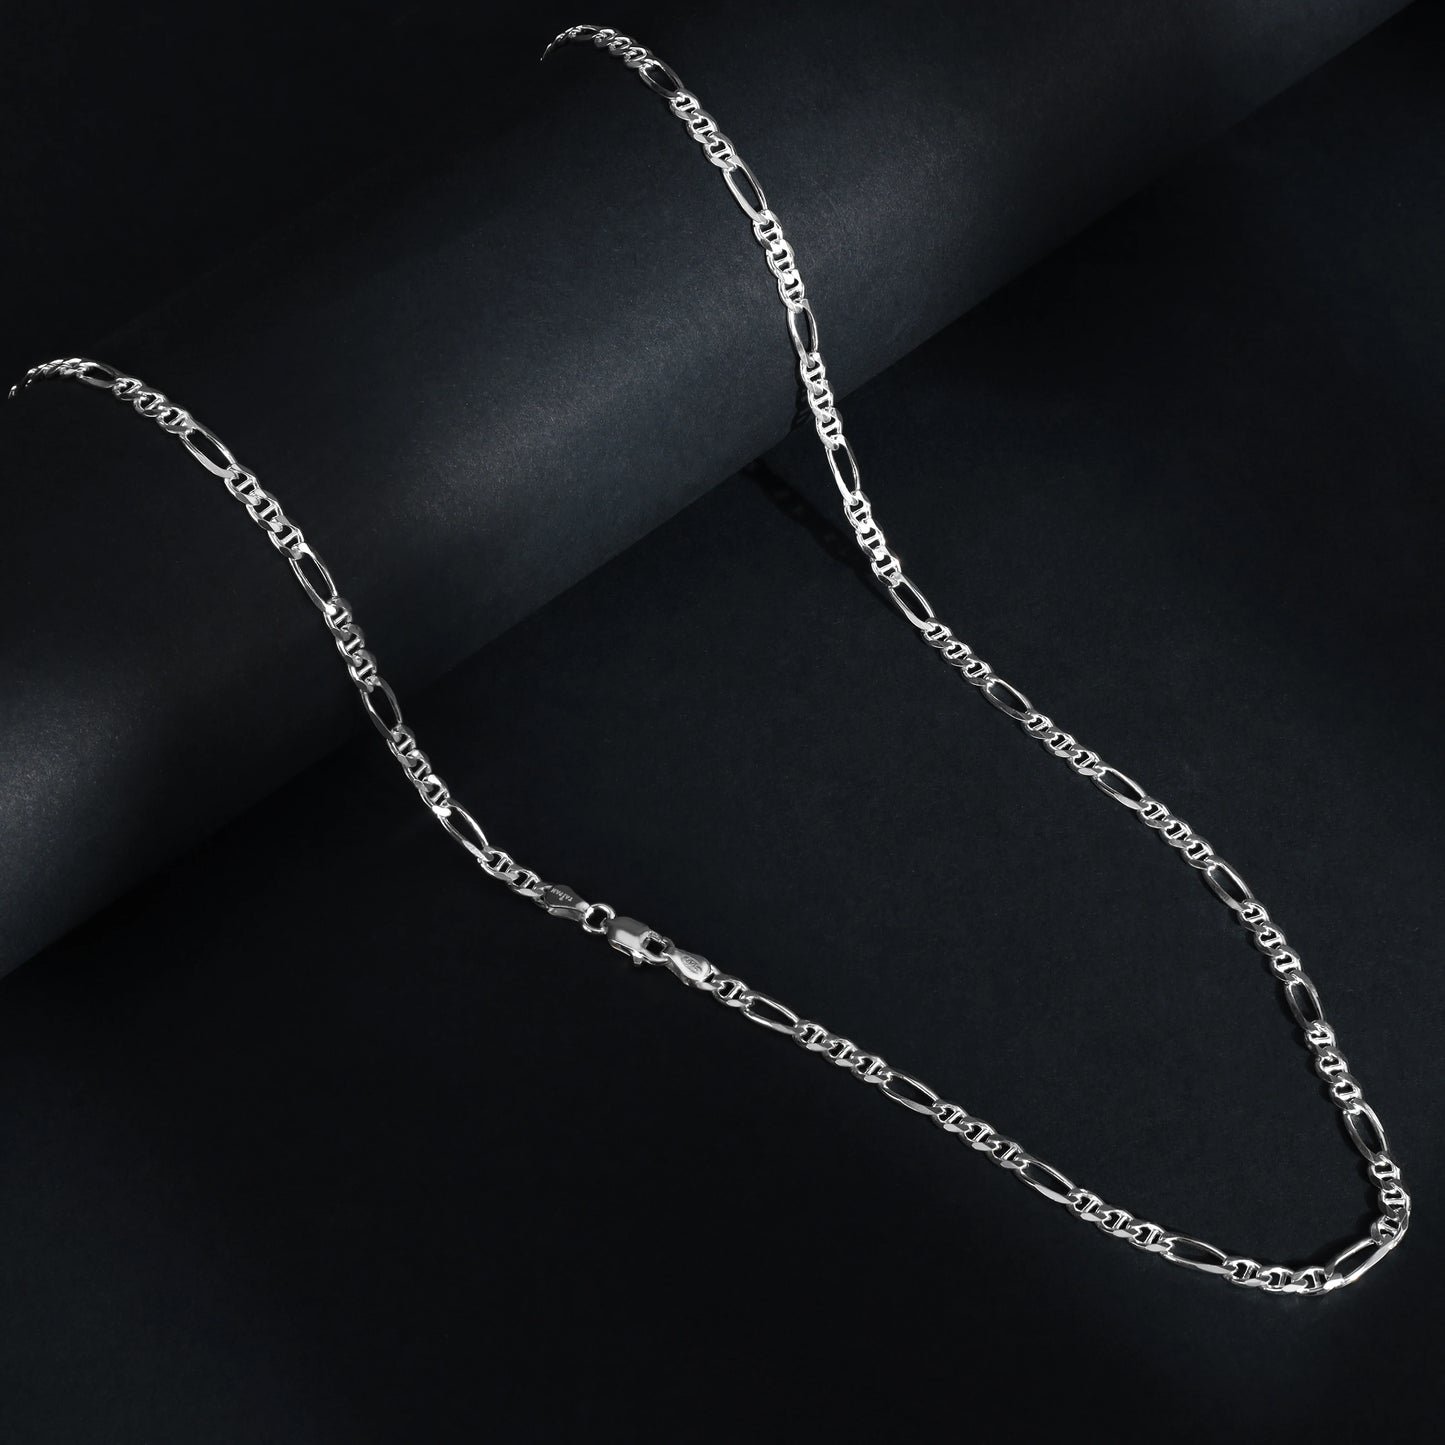 Figarucci Kette 4mm breit 70cm lang 925 Sterlingsilber Made in Italy (K598) - Taipan Schmuck